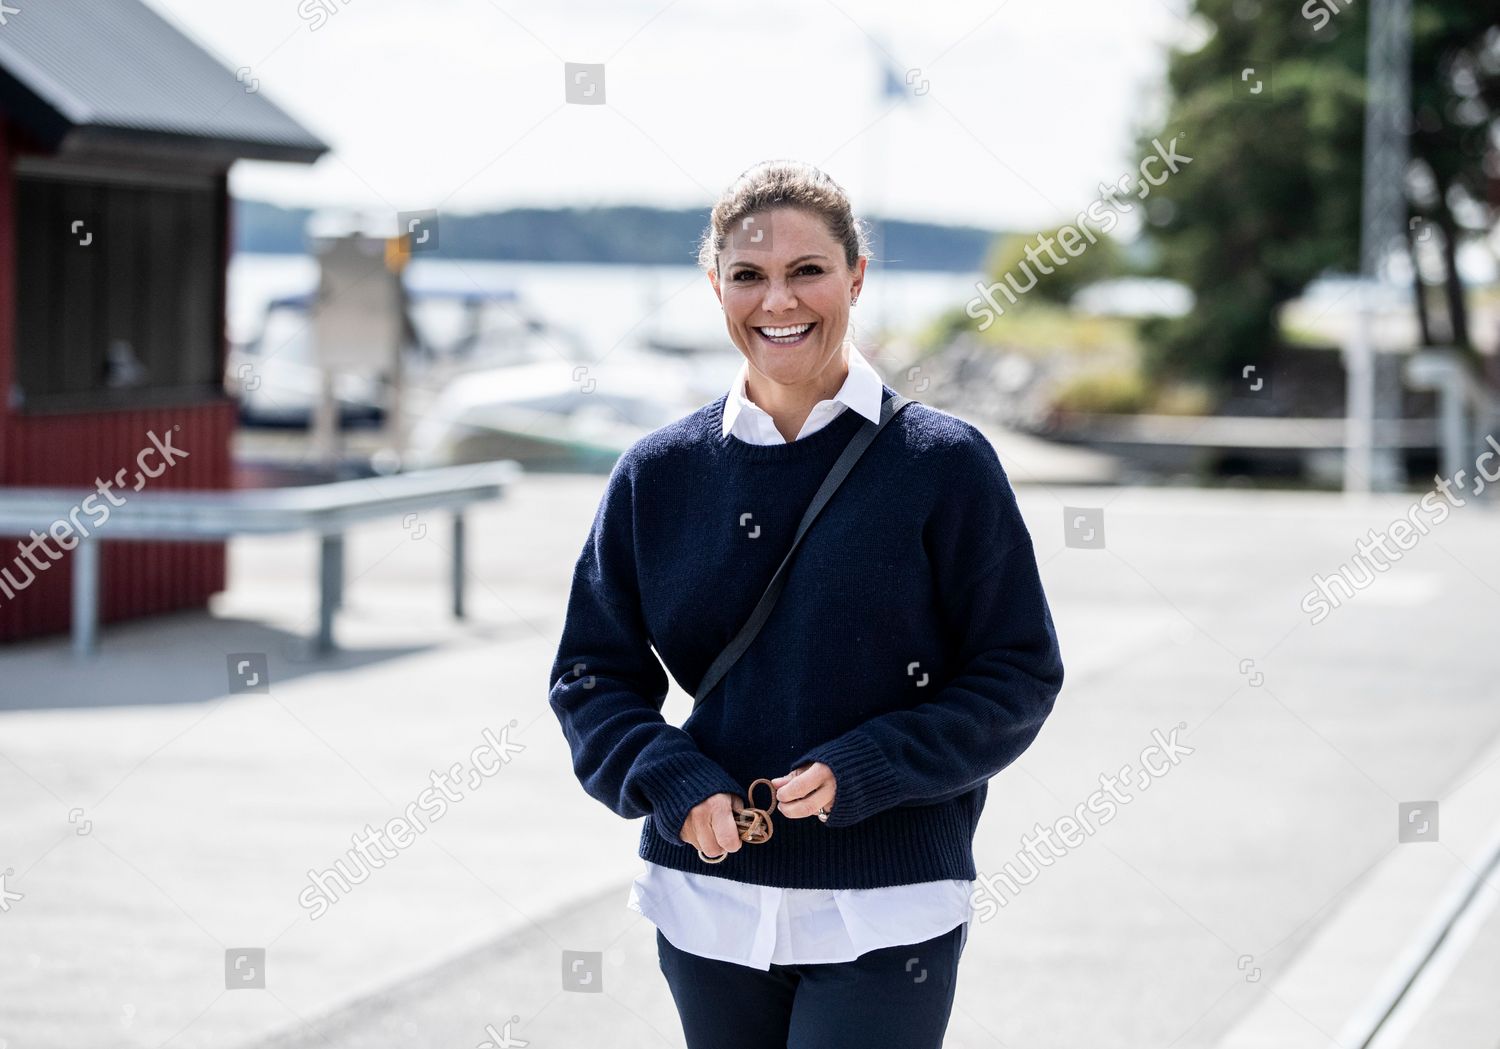 crown-princess-victoria-and-her-dog-rio-visit-alo-and-uto-sweden-shutterstock-editorial-12361980k.jpg